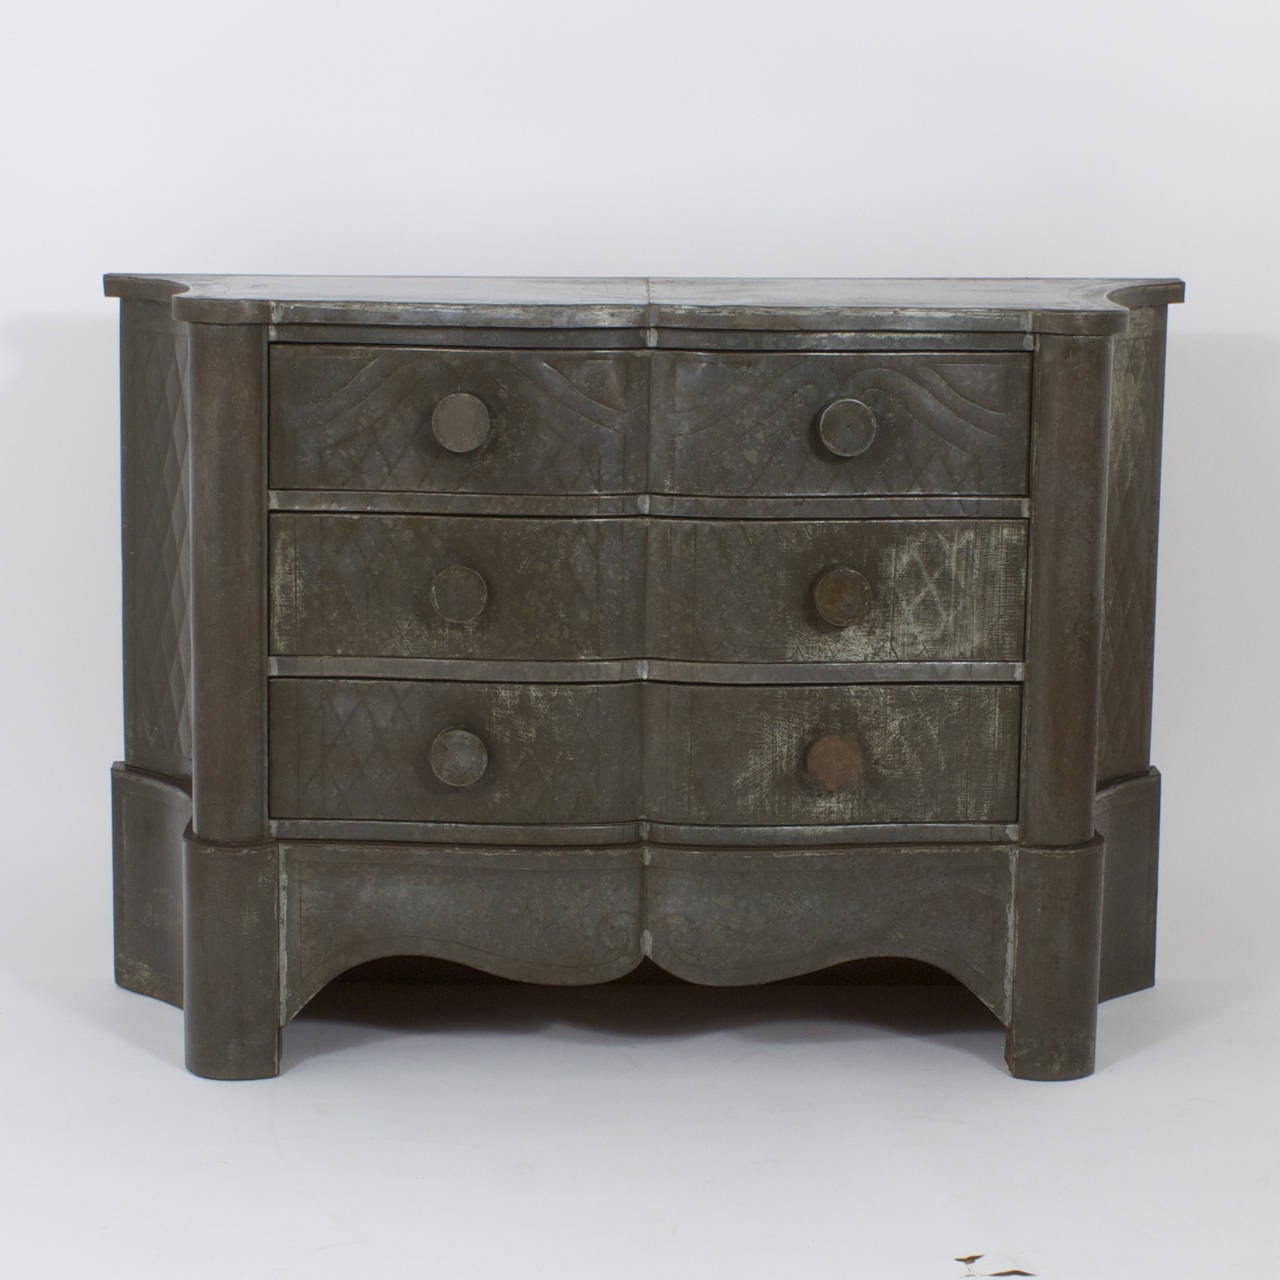 Rustic and rare early 20th century Mexican three-drawer chest entirely clad in tin with a charming oxidized patina, scalloped front and concave sides. This handsome piece features an embossed harlequin pattern on the front and sides with classic